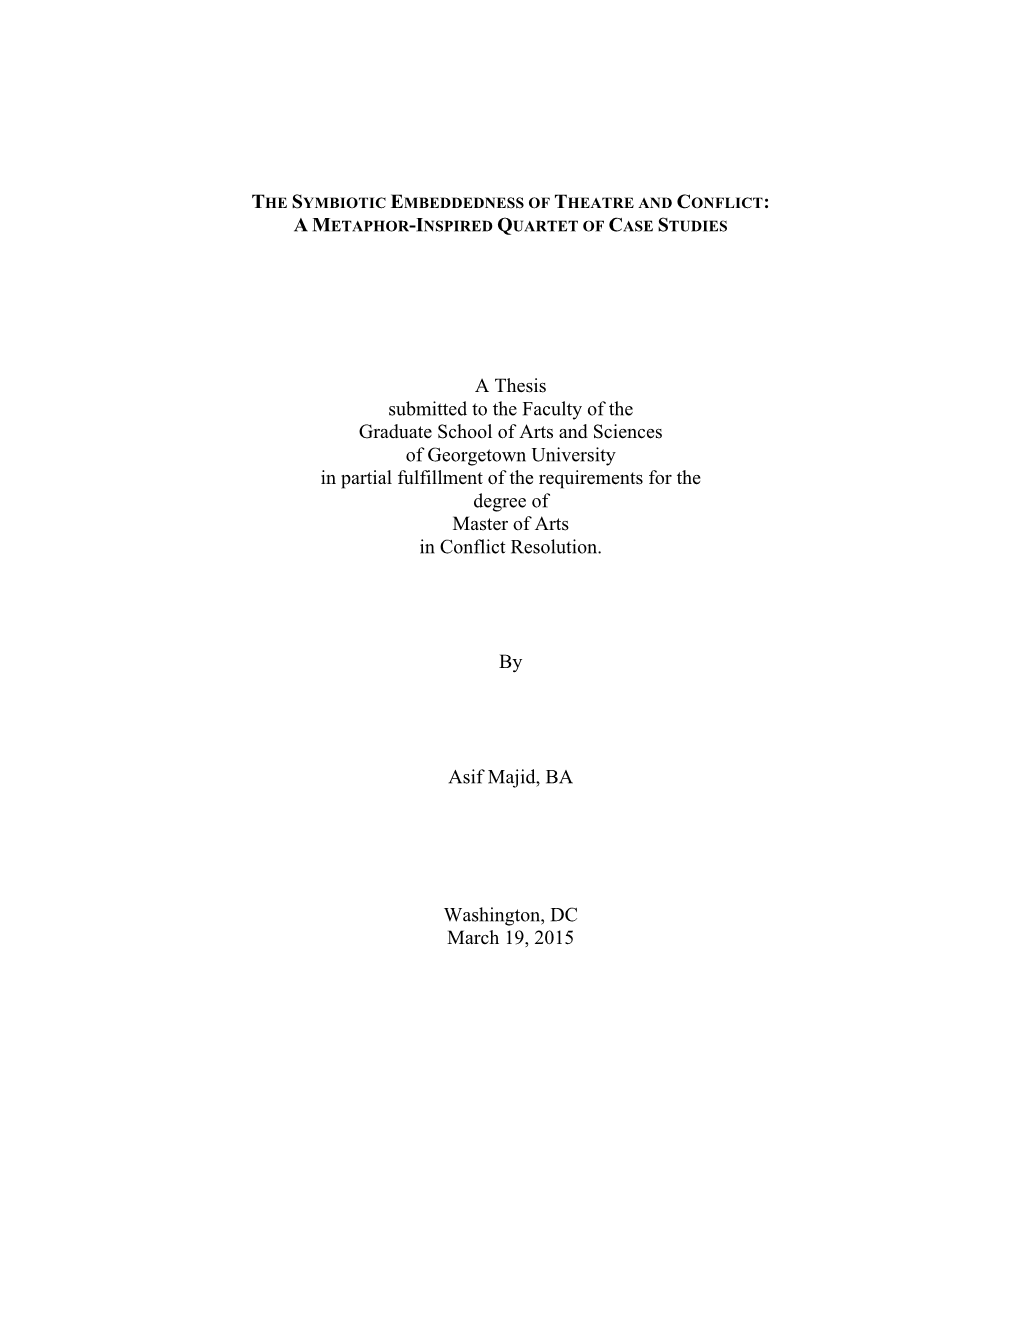 A Thesis Submitted to the Faculty of the Graduate School of Arts and Sciences of Georgetown University in Partial Fulfillment Of